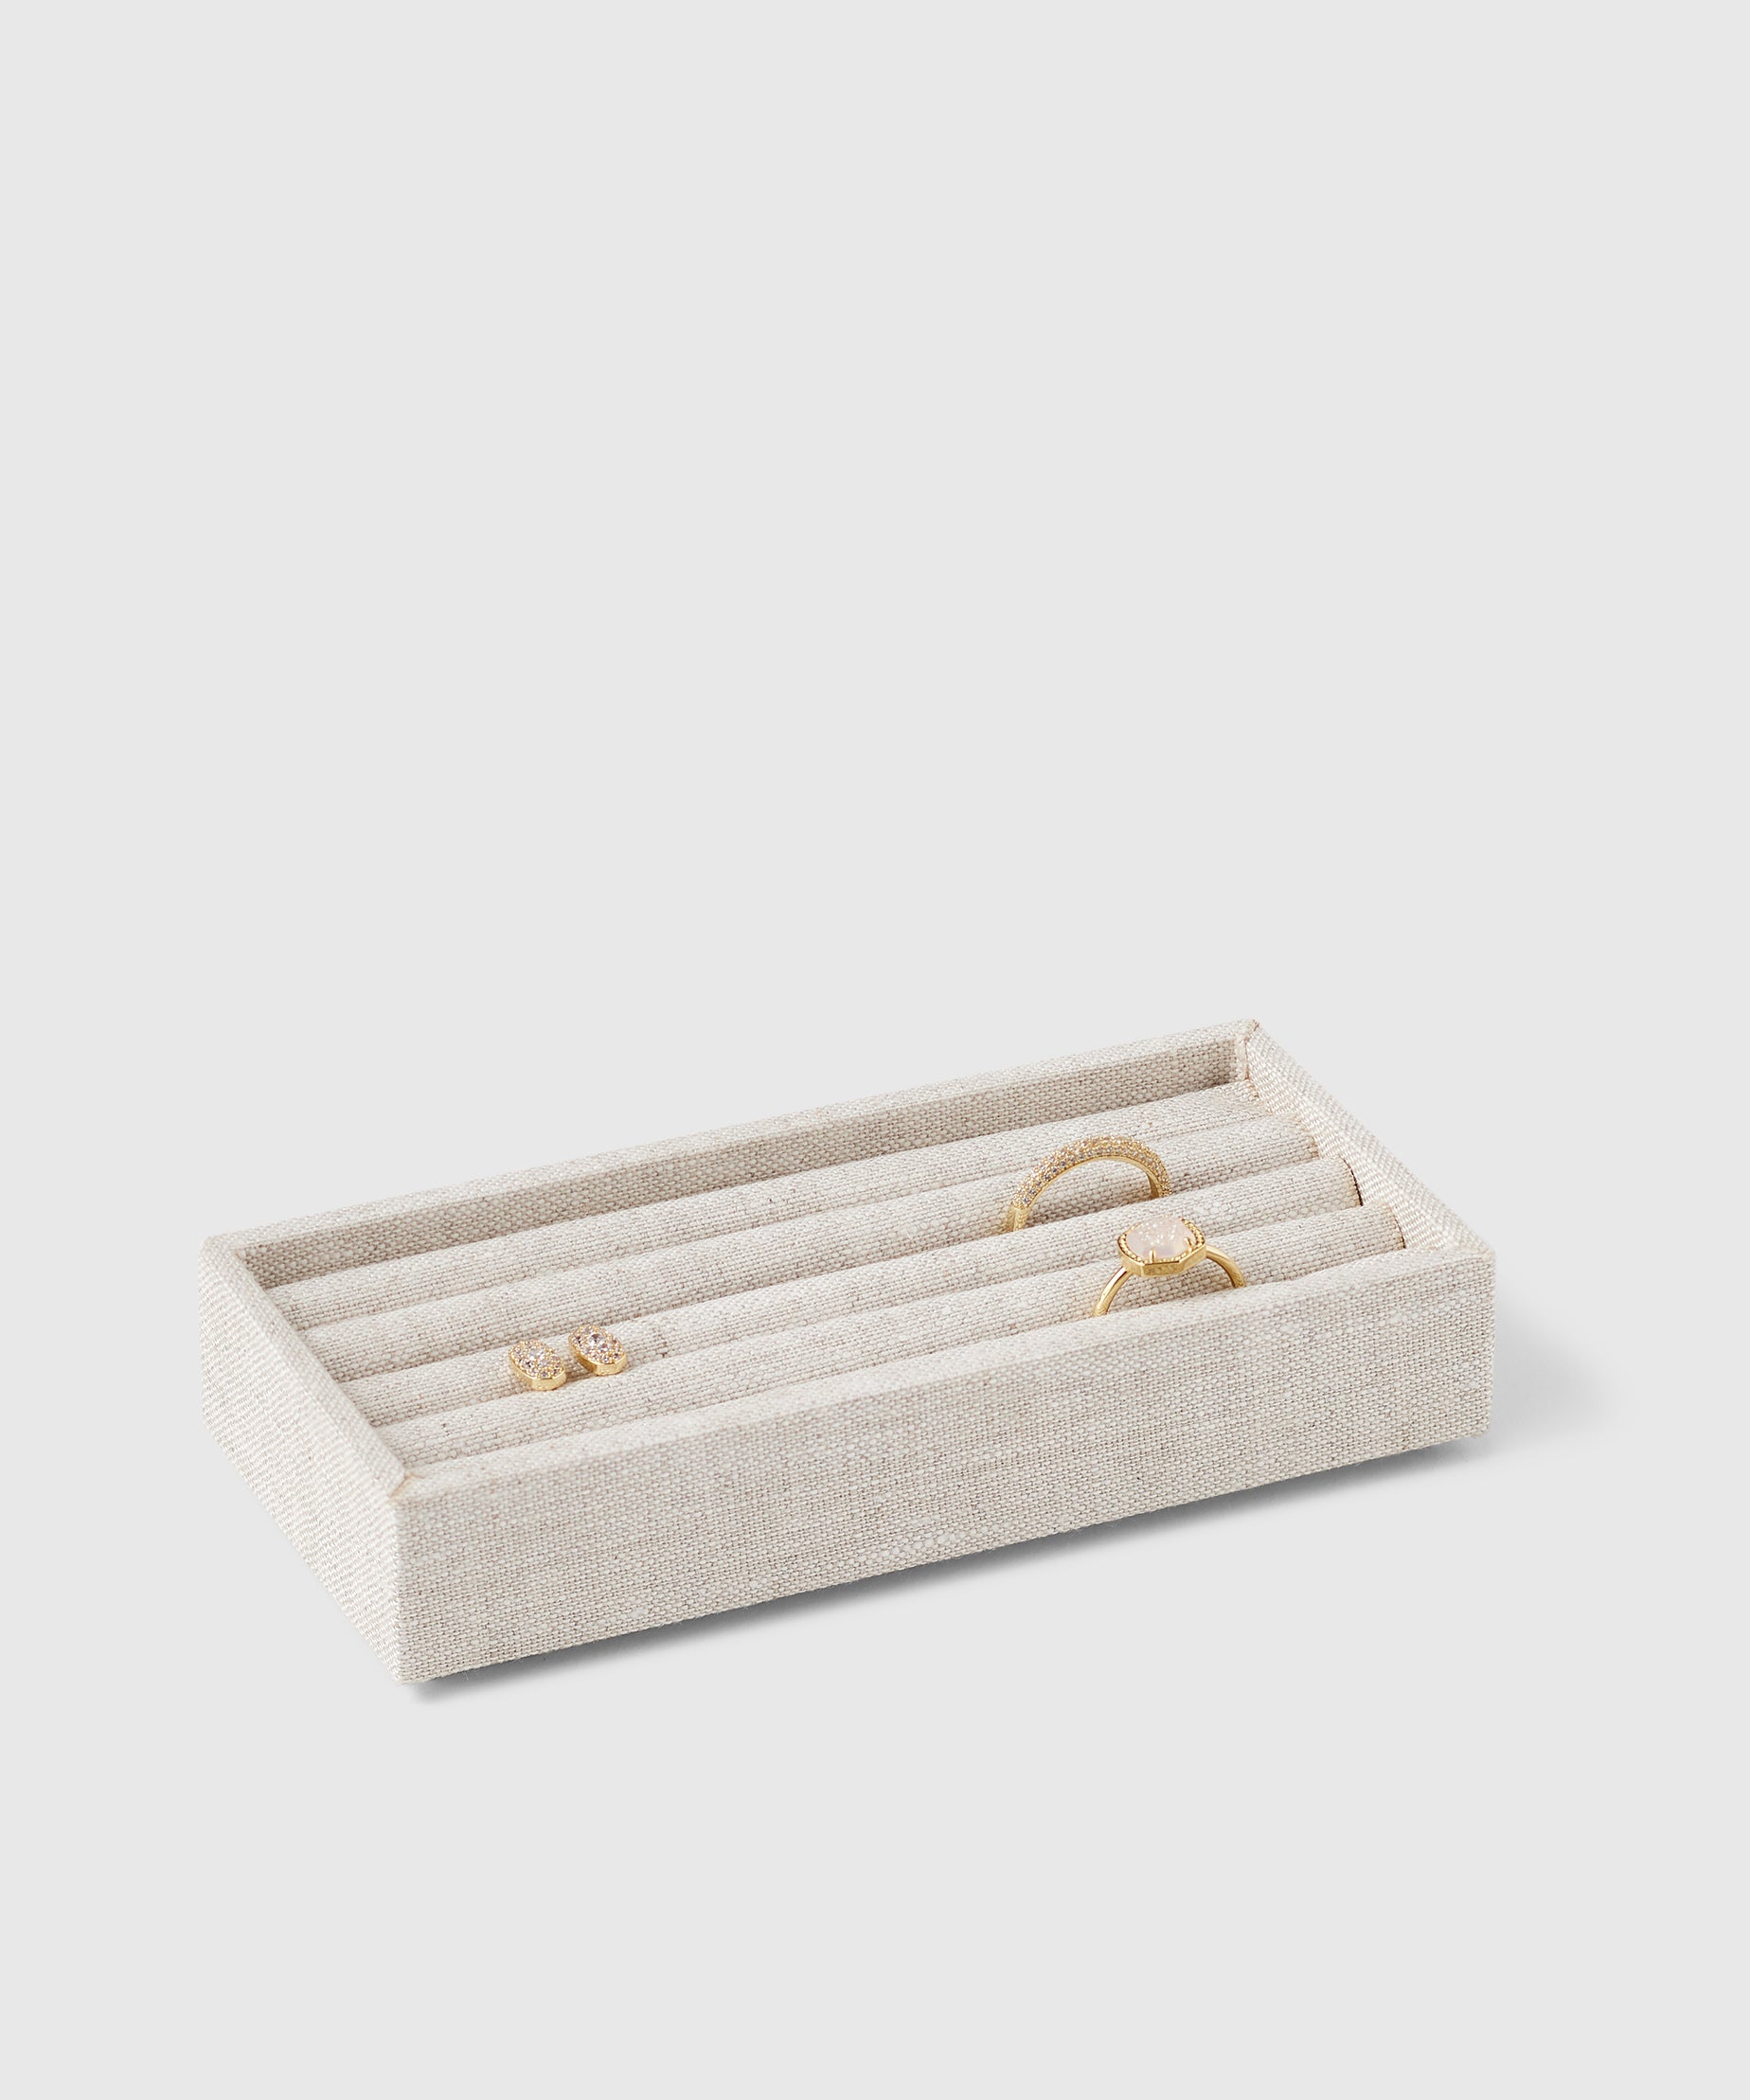 Linen Jewelry Roll Insert | The Container Store x KonMari by Marie Kondo 